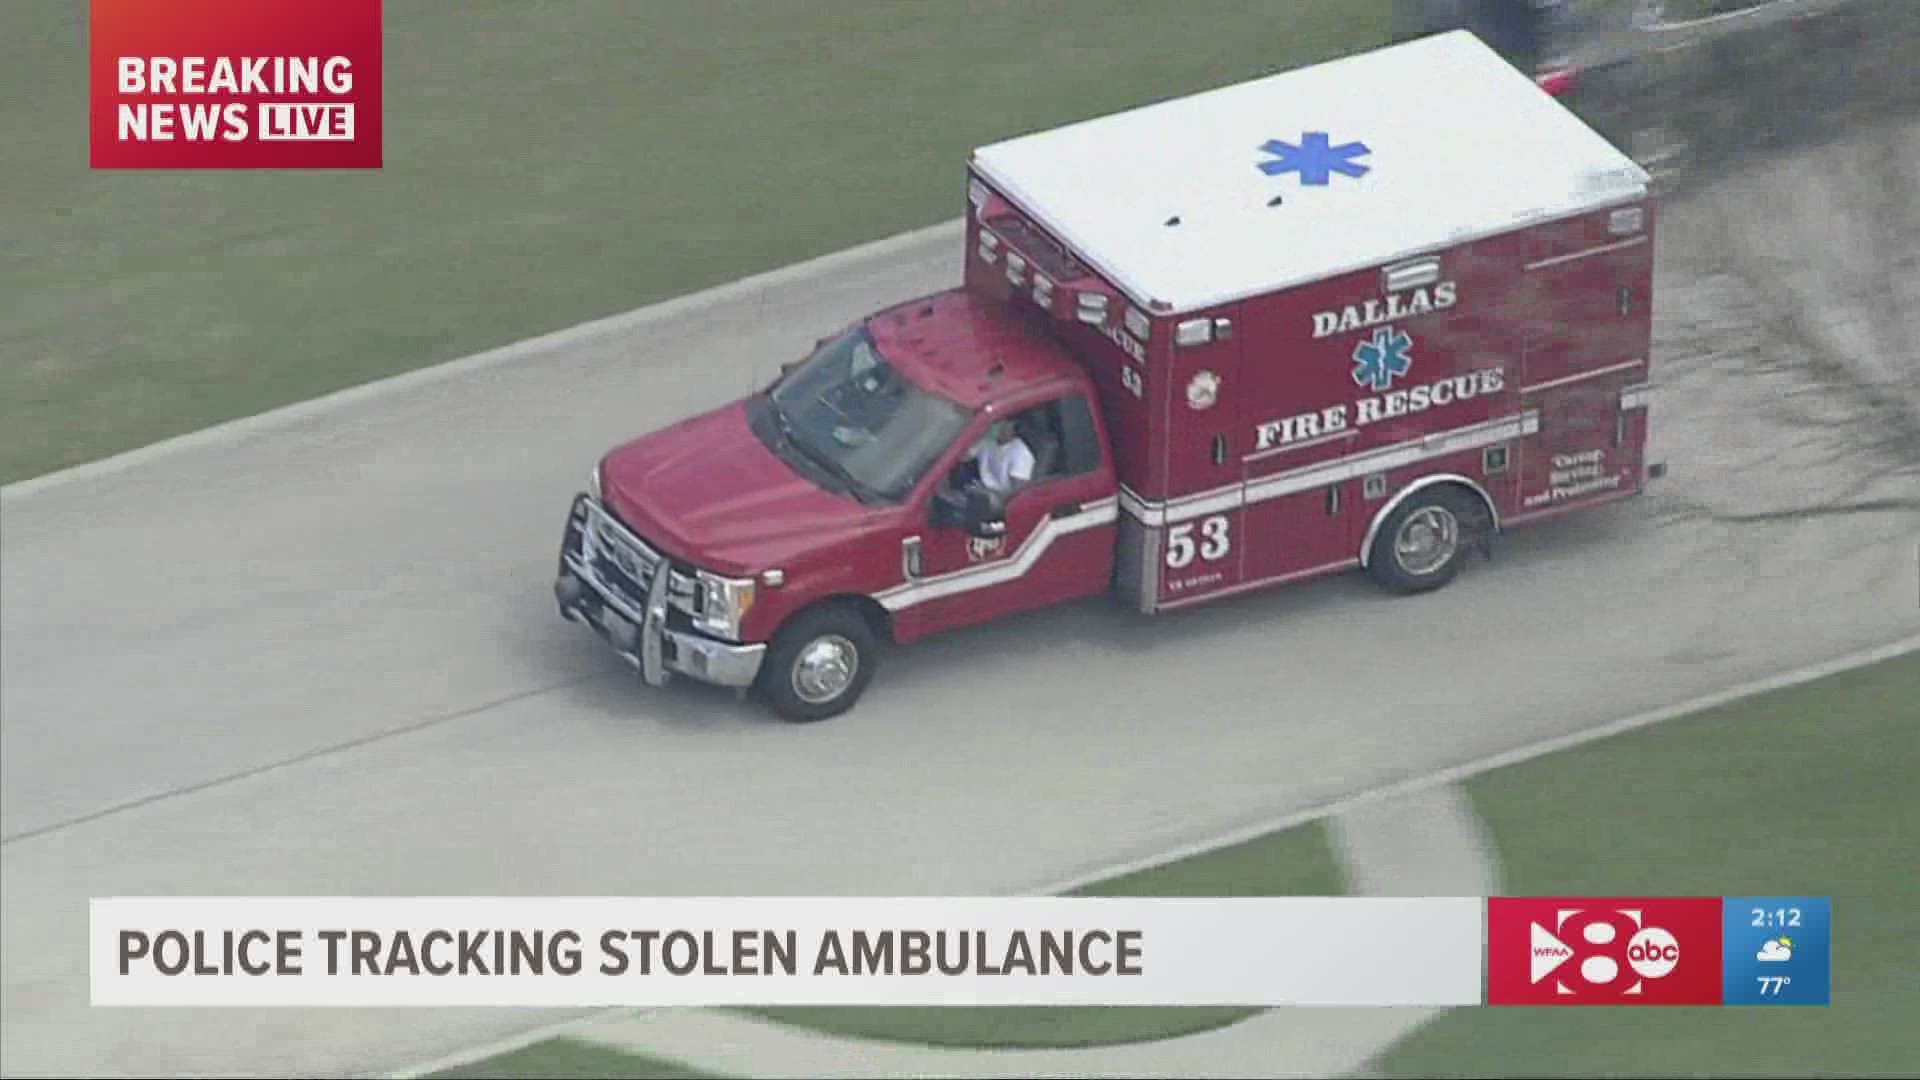 The ambulance was stolen from a Dallas fire station and traveled through much of North Texas during the pursuit.